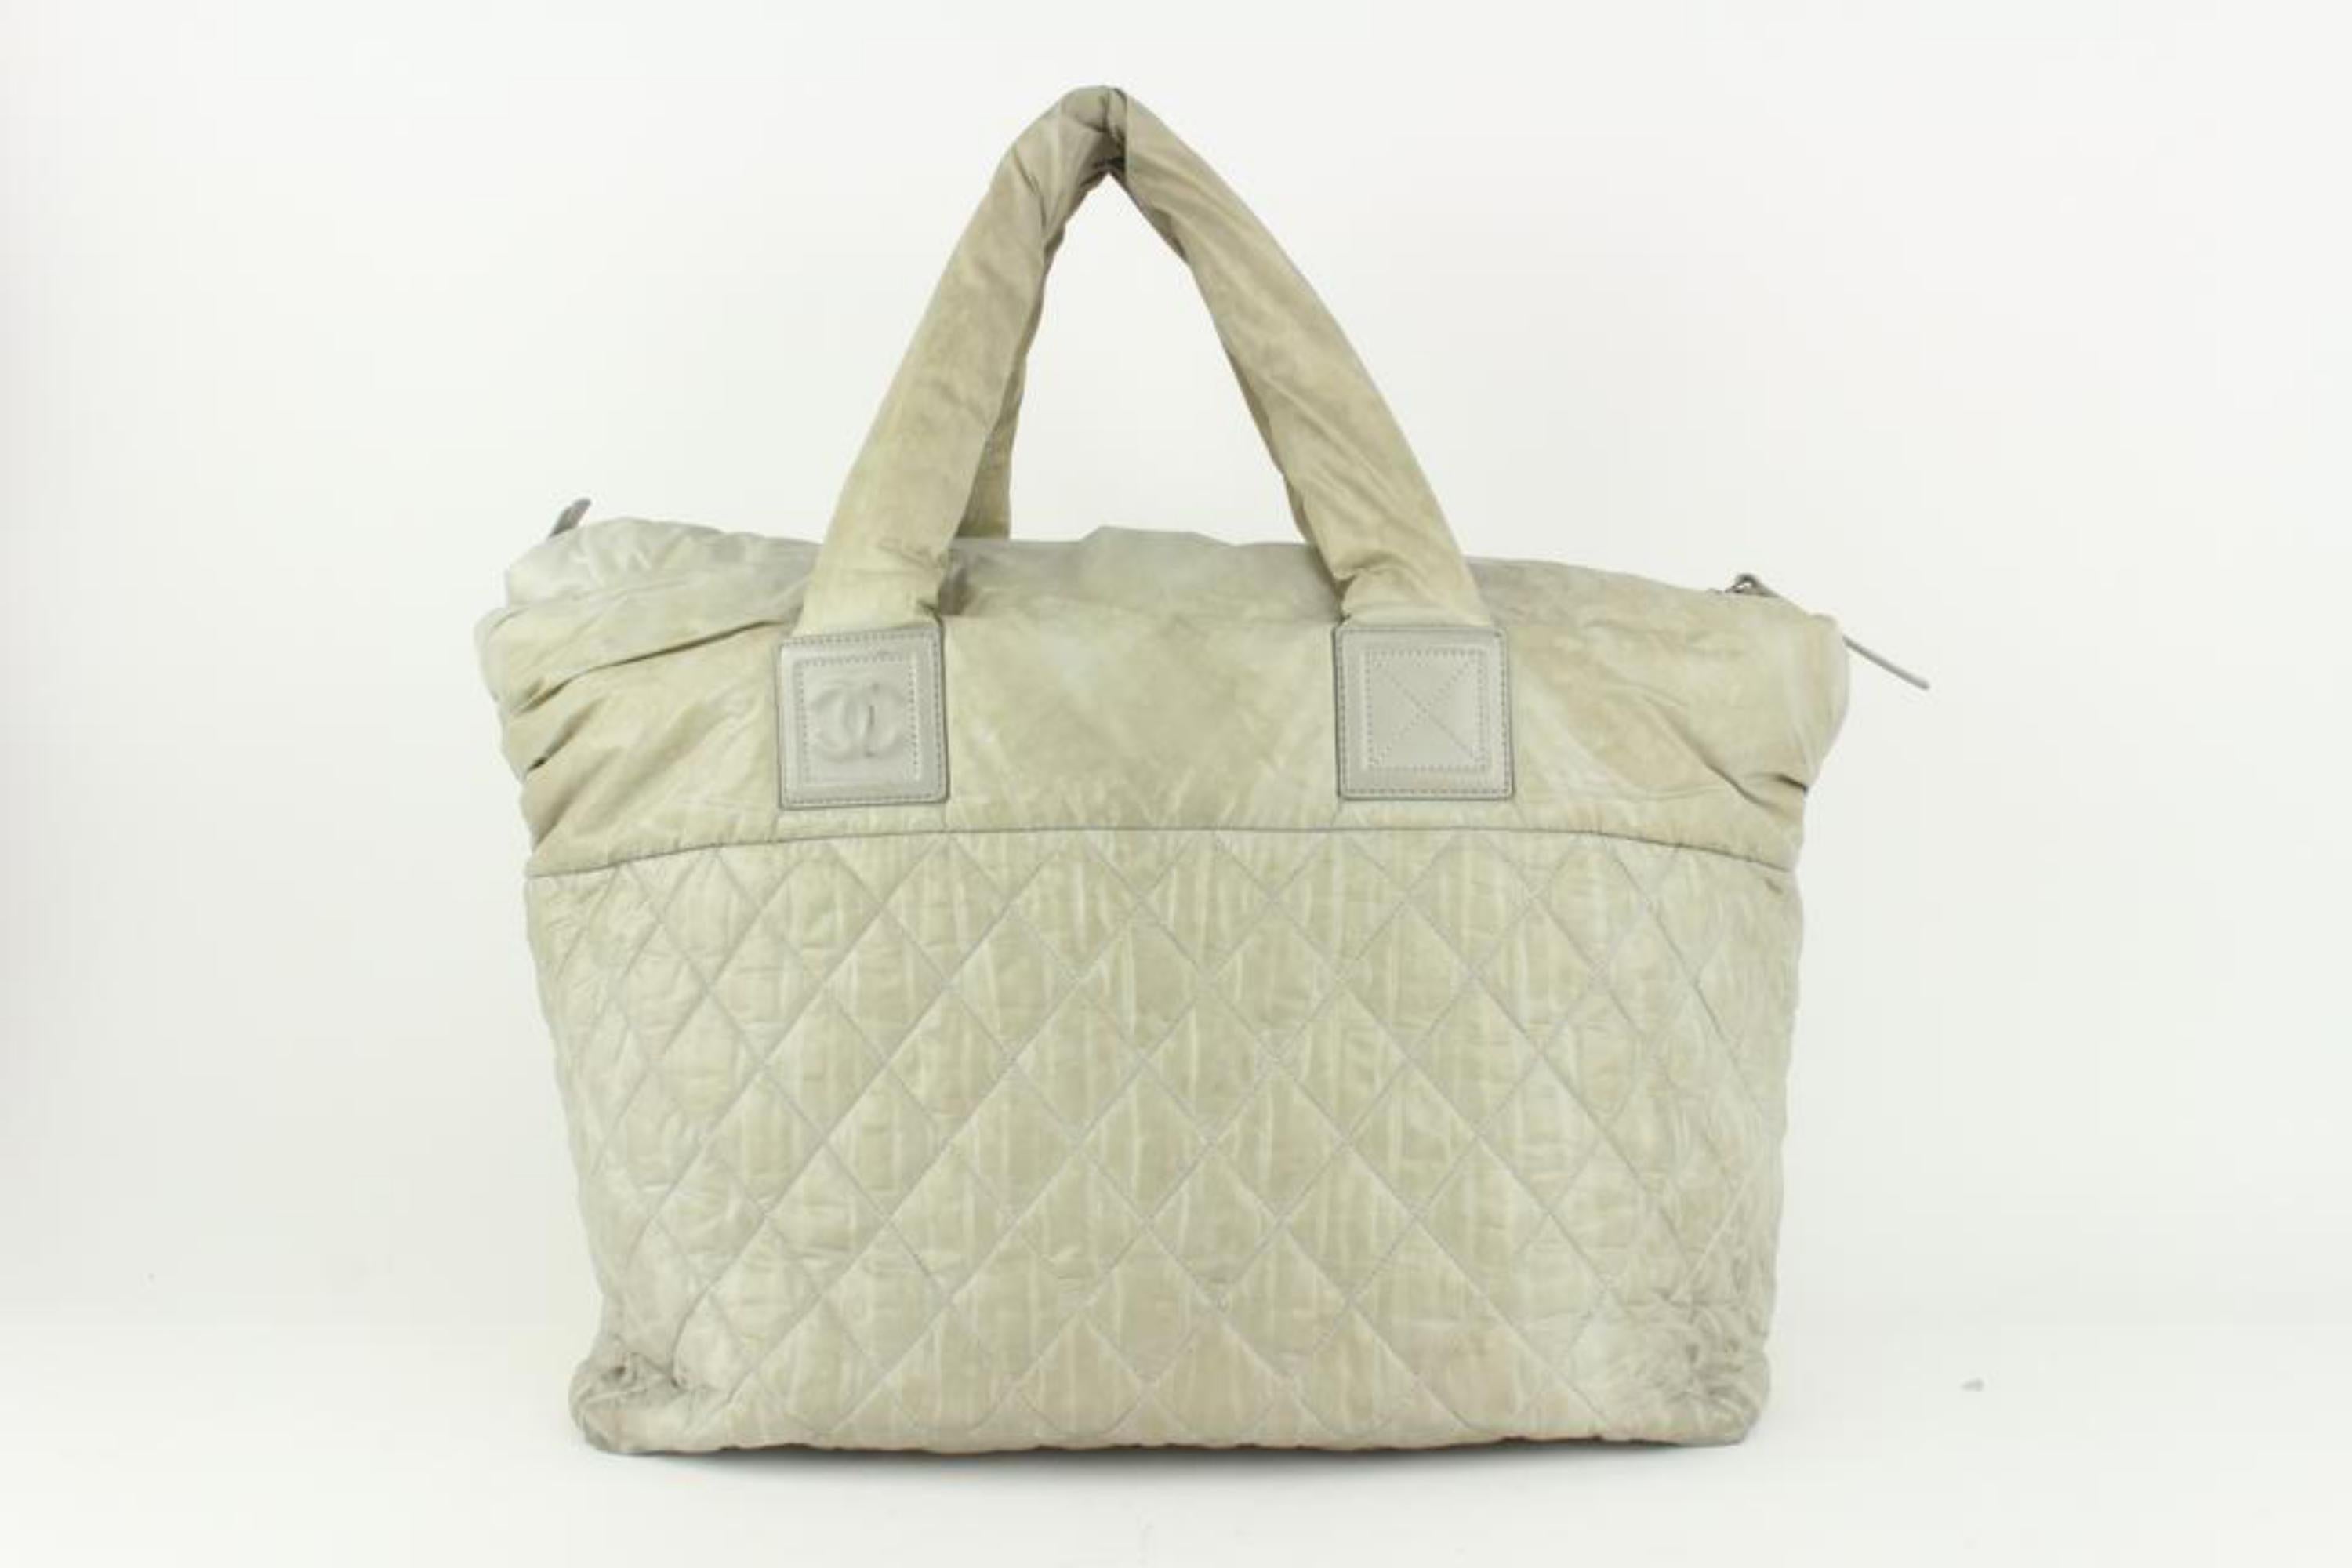 Chanel Grey Quilted Nylon Cocoon Tote Bag 1115c8 For Sale 6